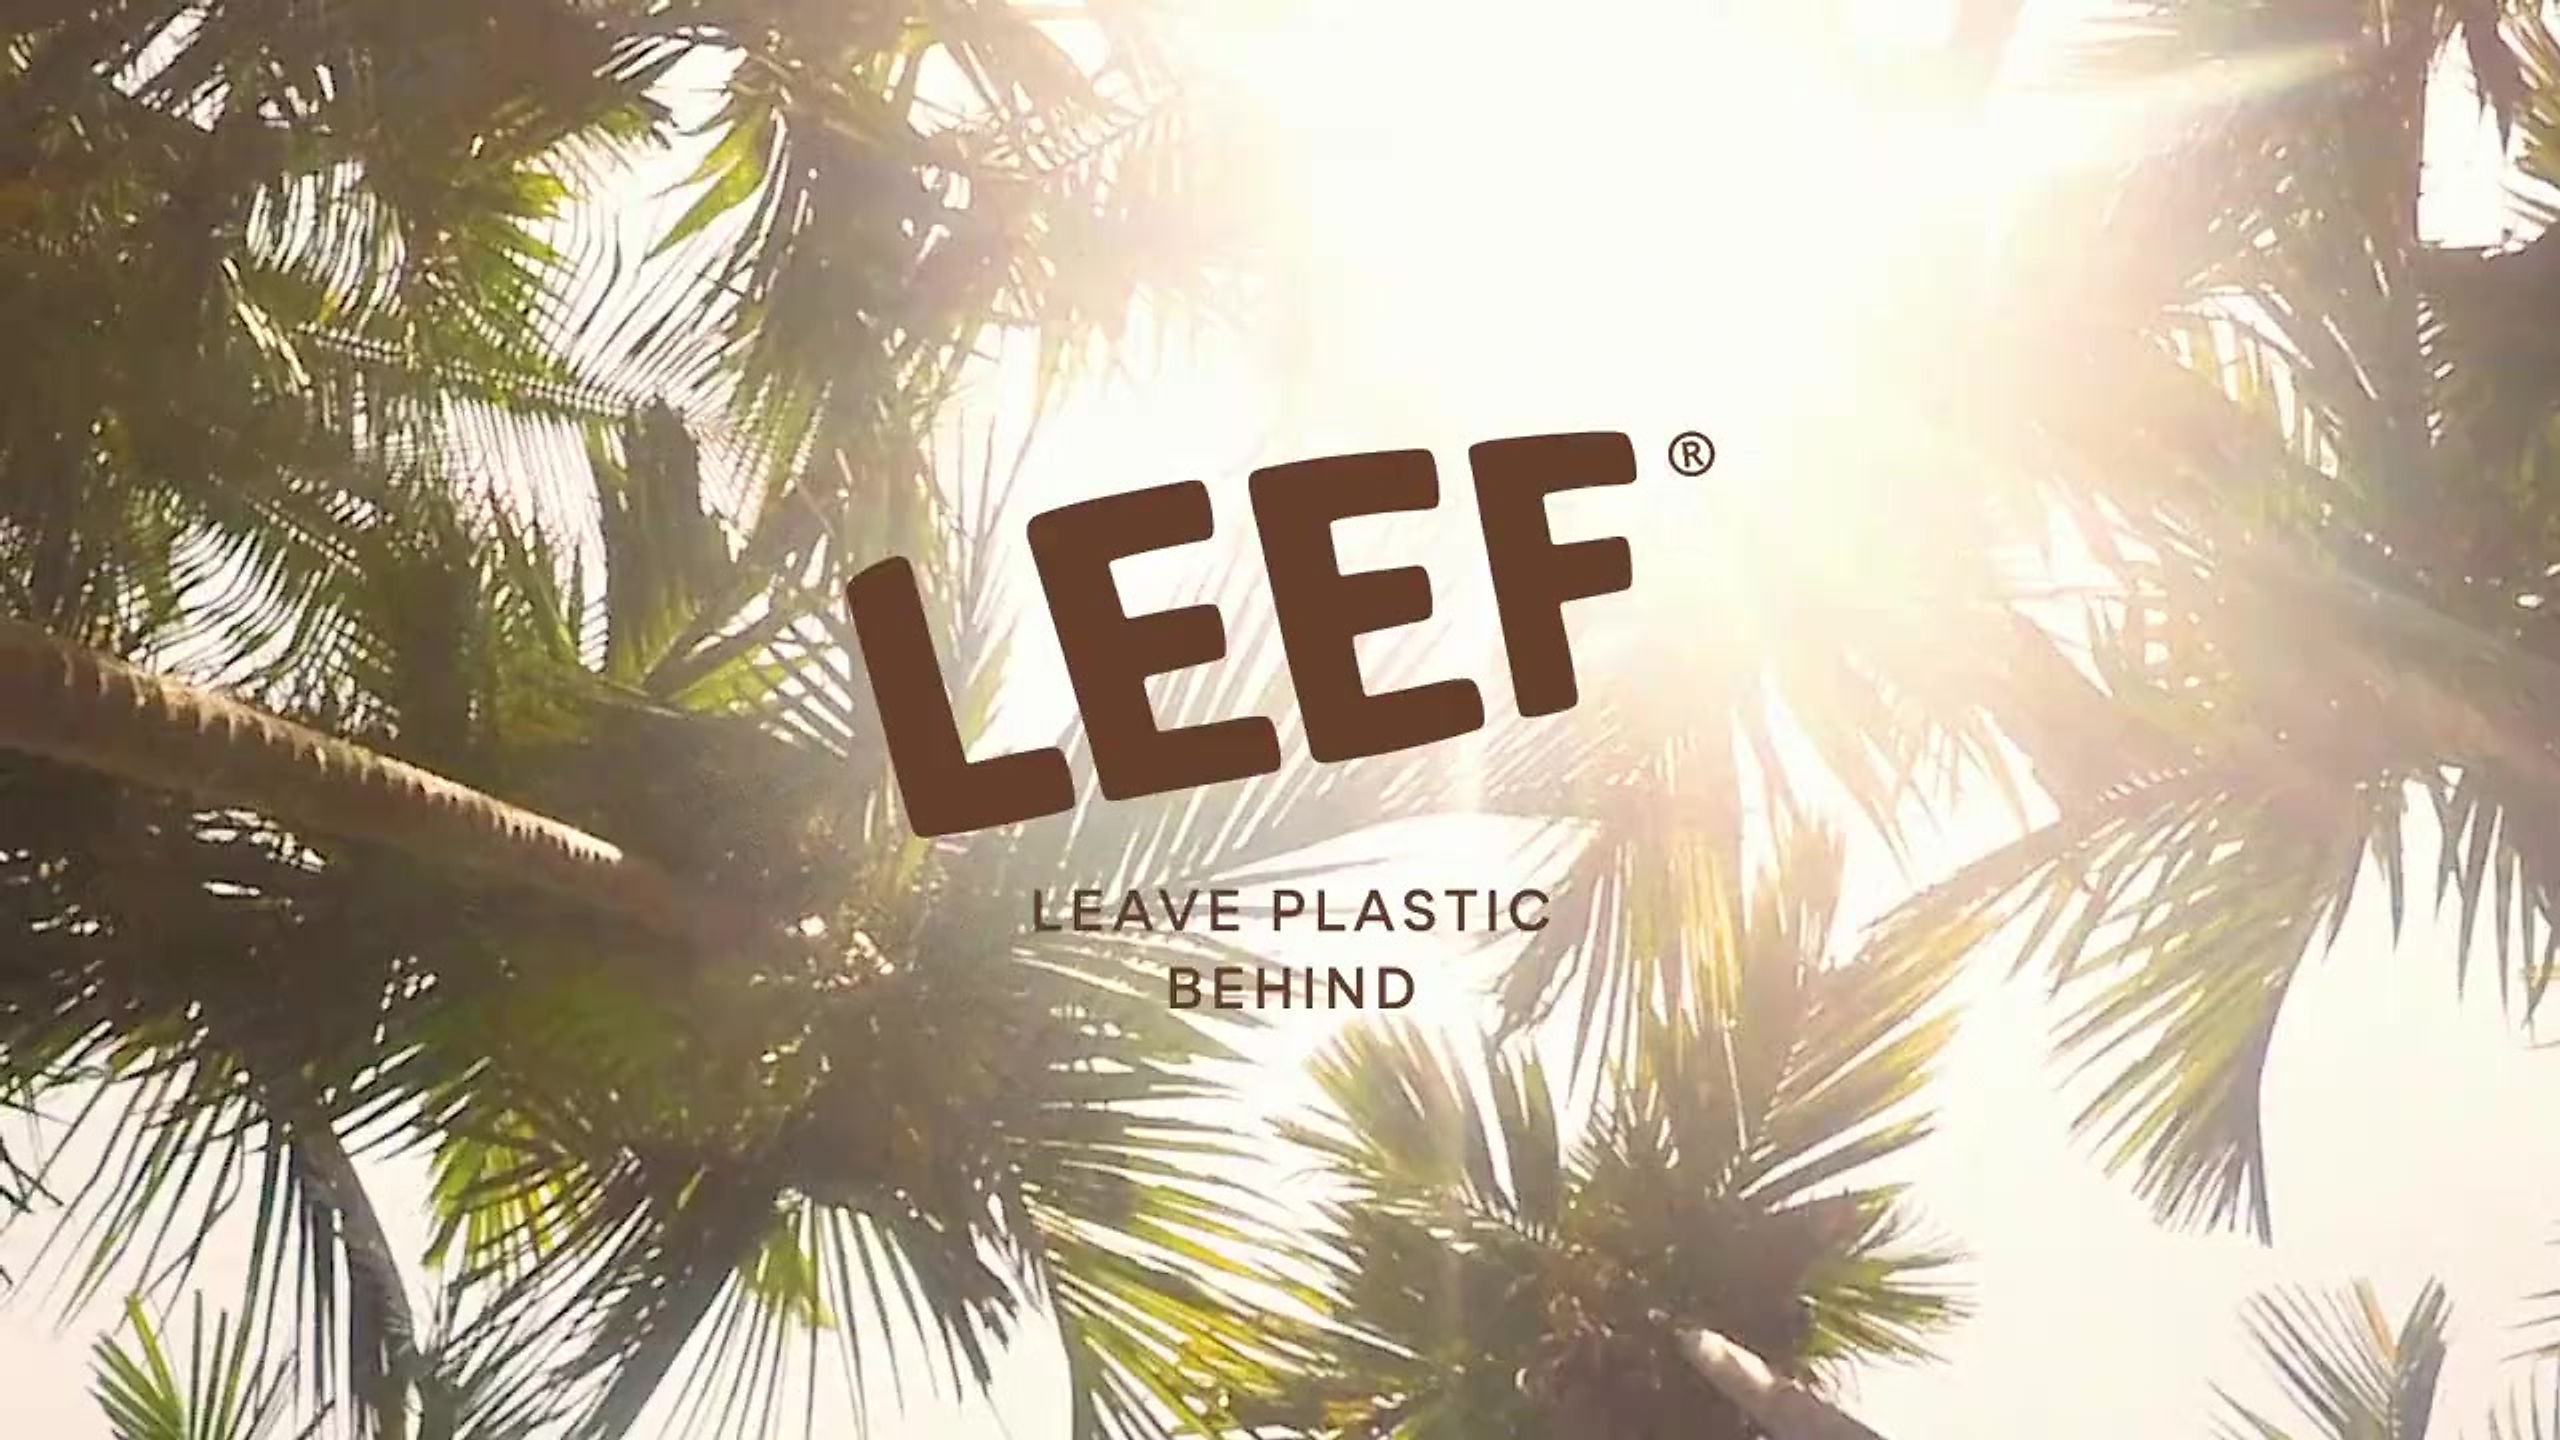 The way of the leaf - how our LEEF plates are made